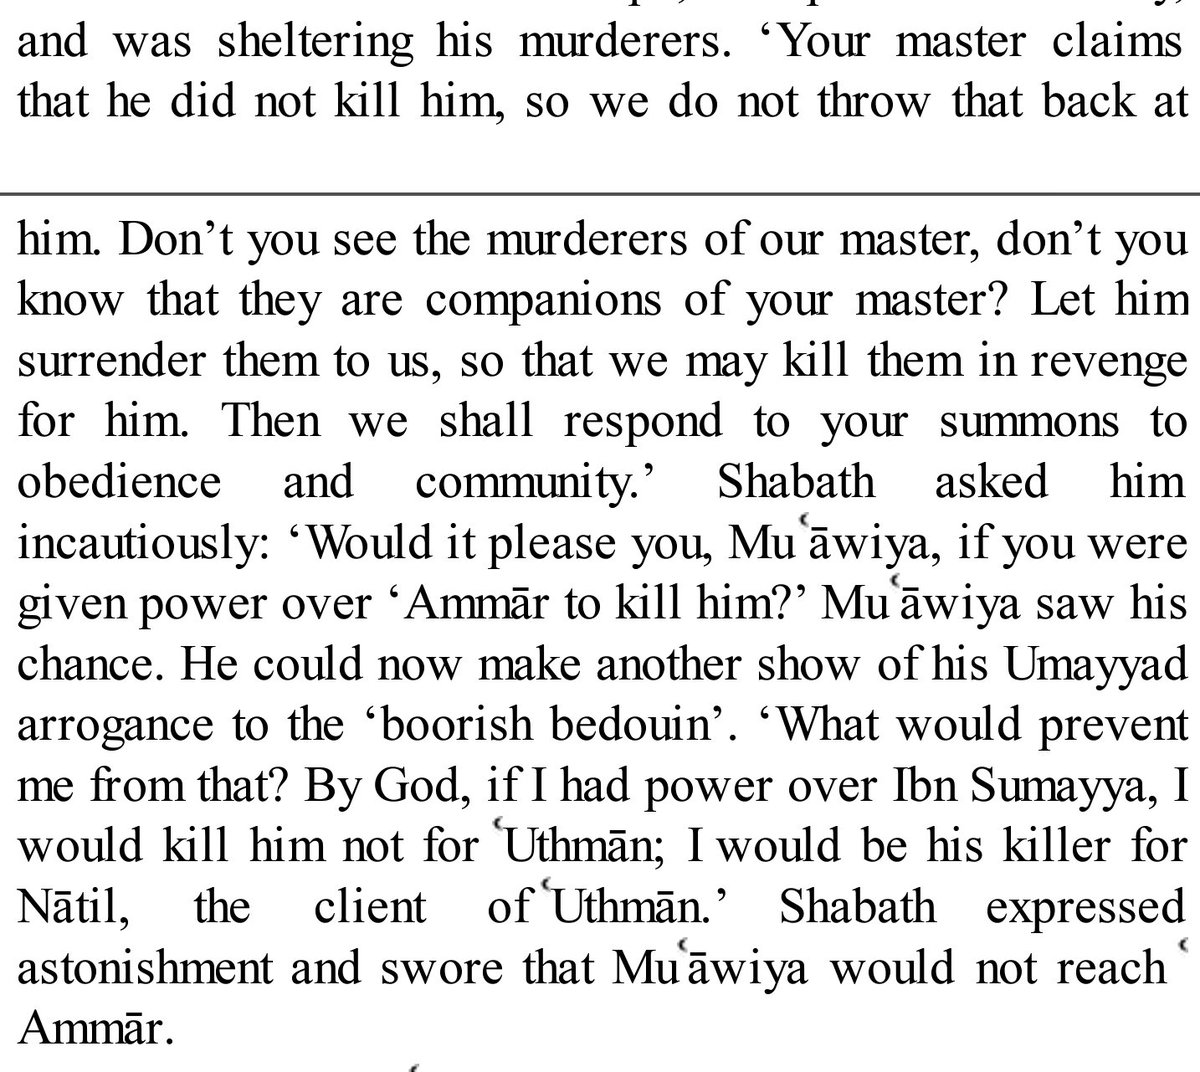 Muawiya expressing his desire to kill Hazrat Ammar ibn Yasir (AS), one of the dearest companions of the Holy Prophet (SAWW).Yet, there are Muslims who would ignore this and still put (RA) next to his accursed name.